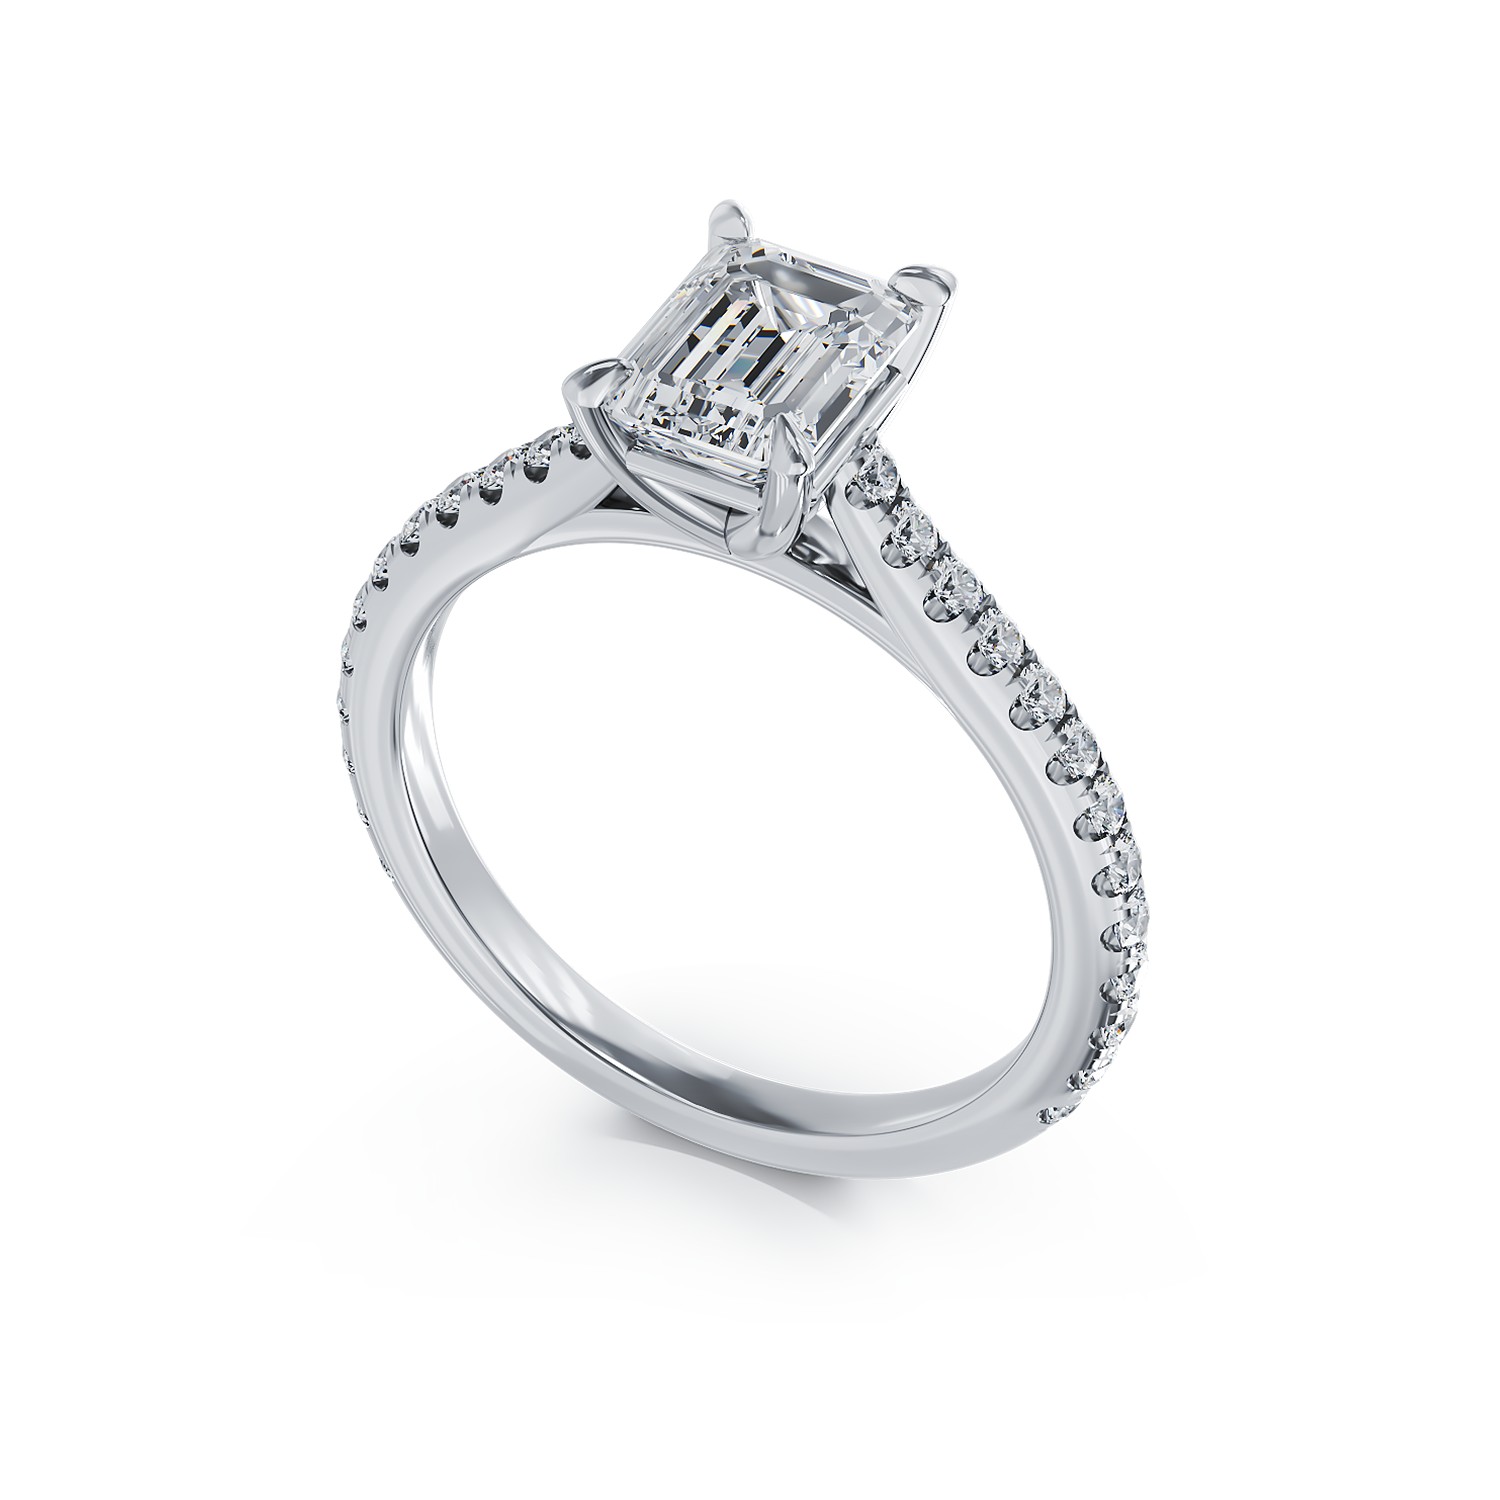 18K white gold engagement ring with 1.2ct diamond and 0.285ct diamonds